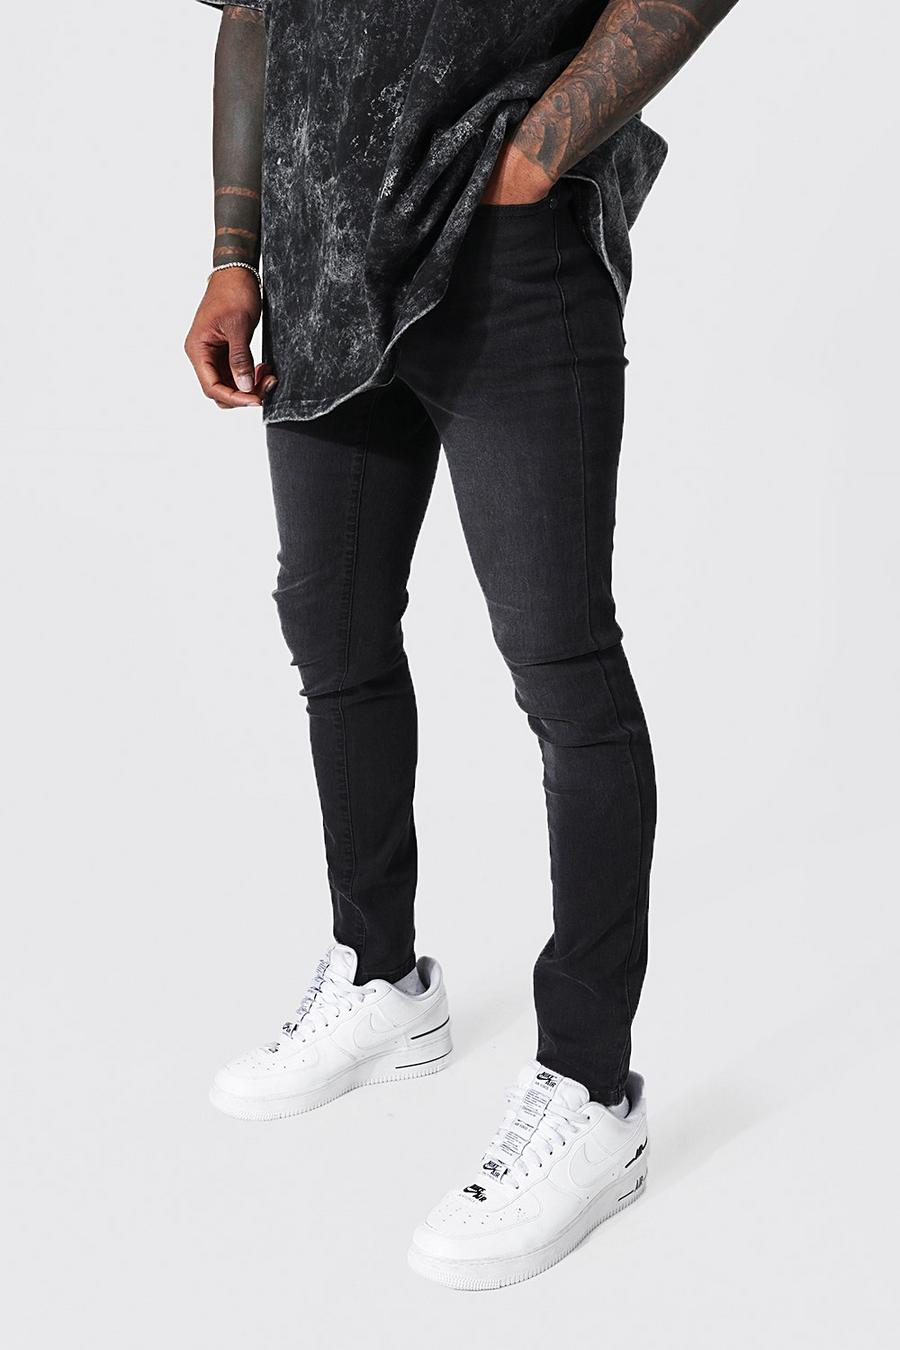 Jeans Super Skinny Fit in cotone organico, Charcoal gris image number 1